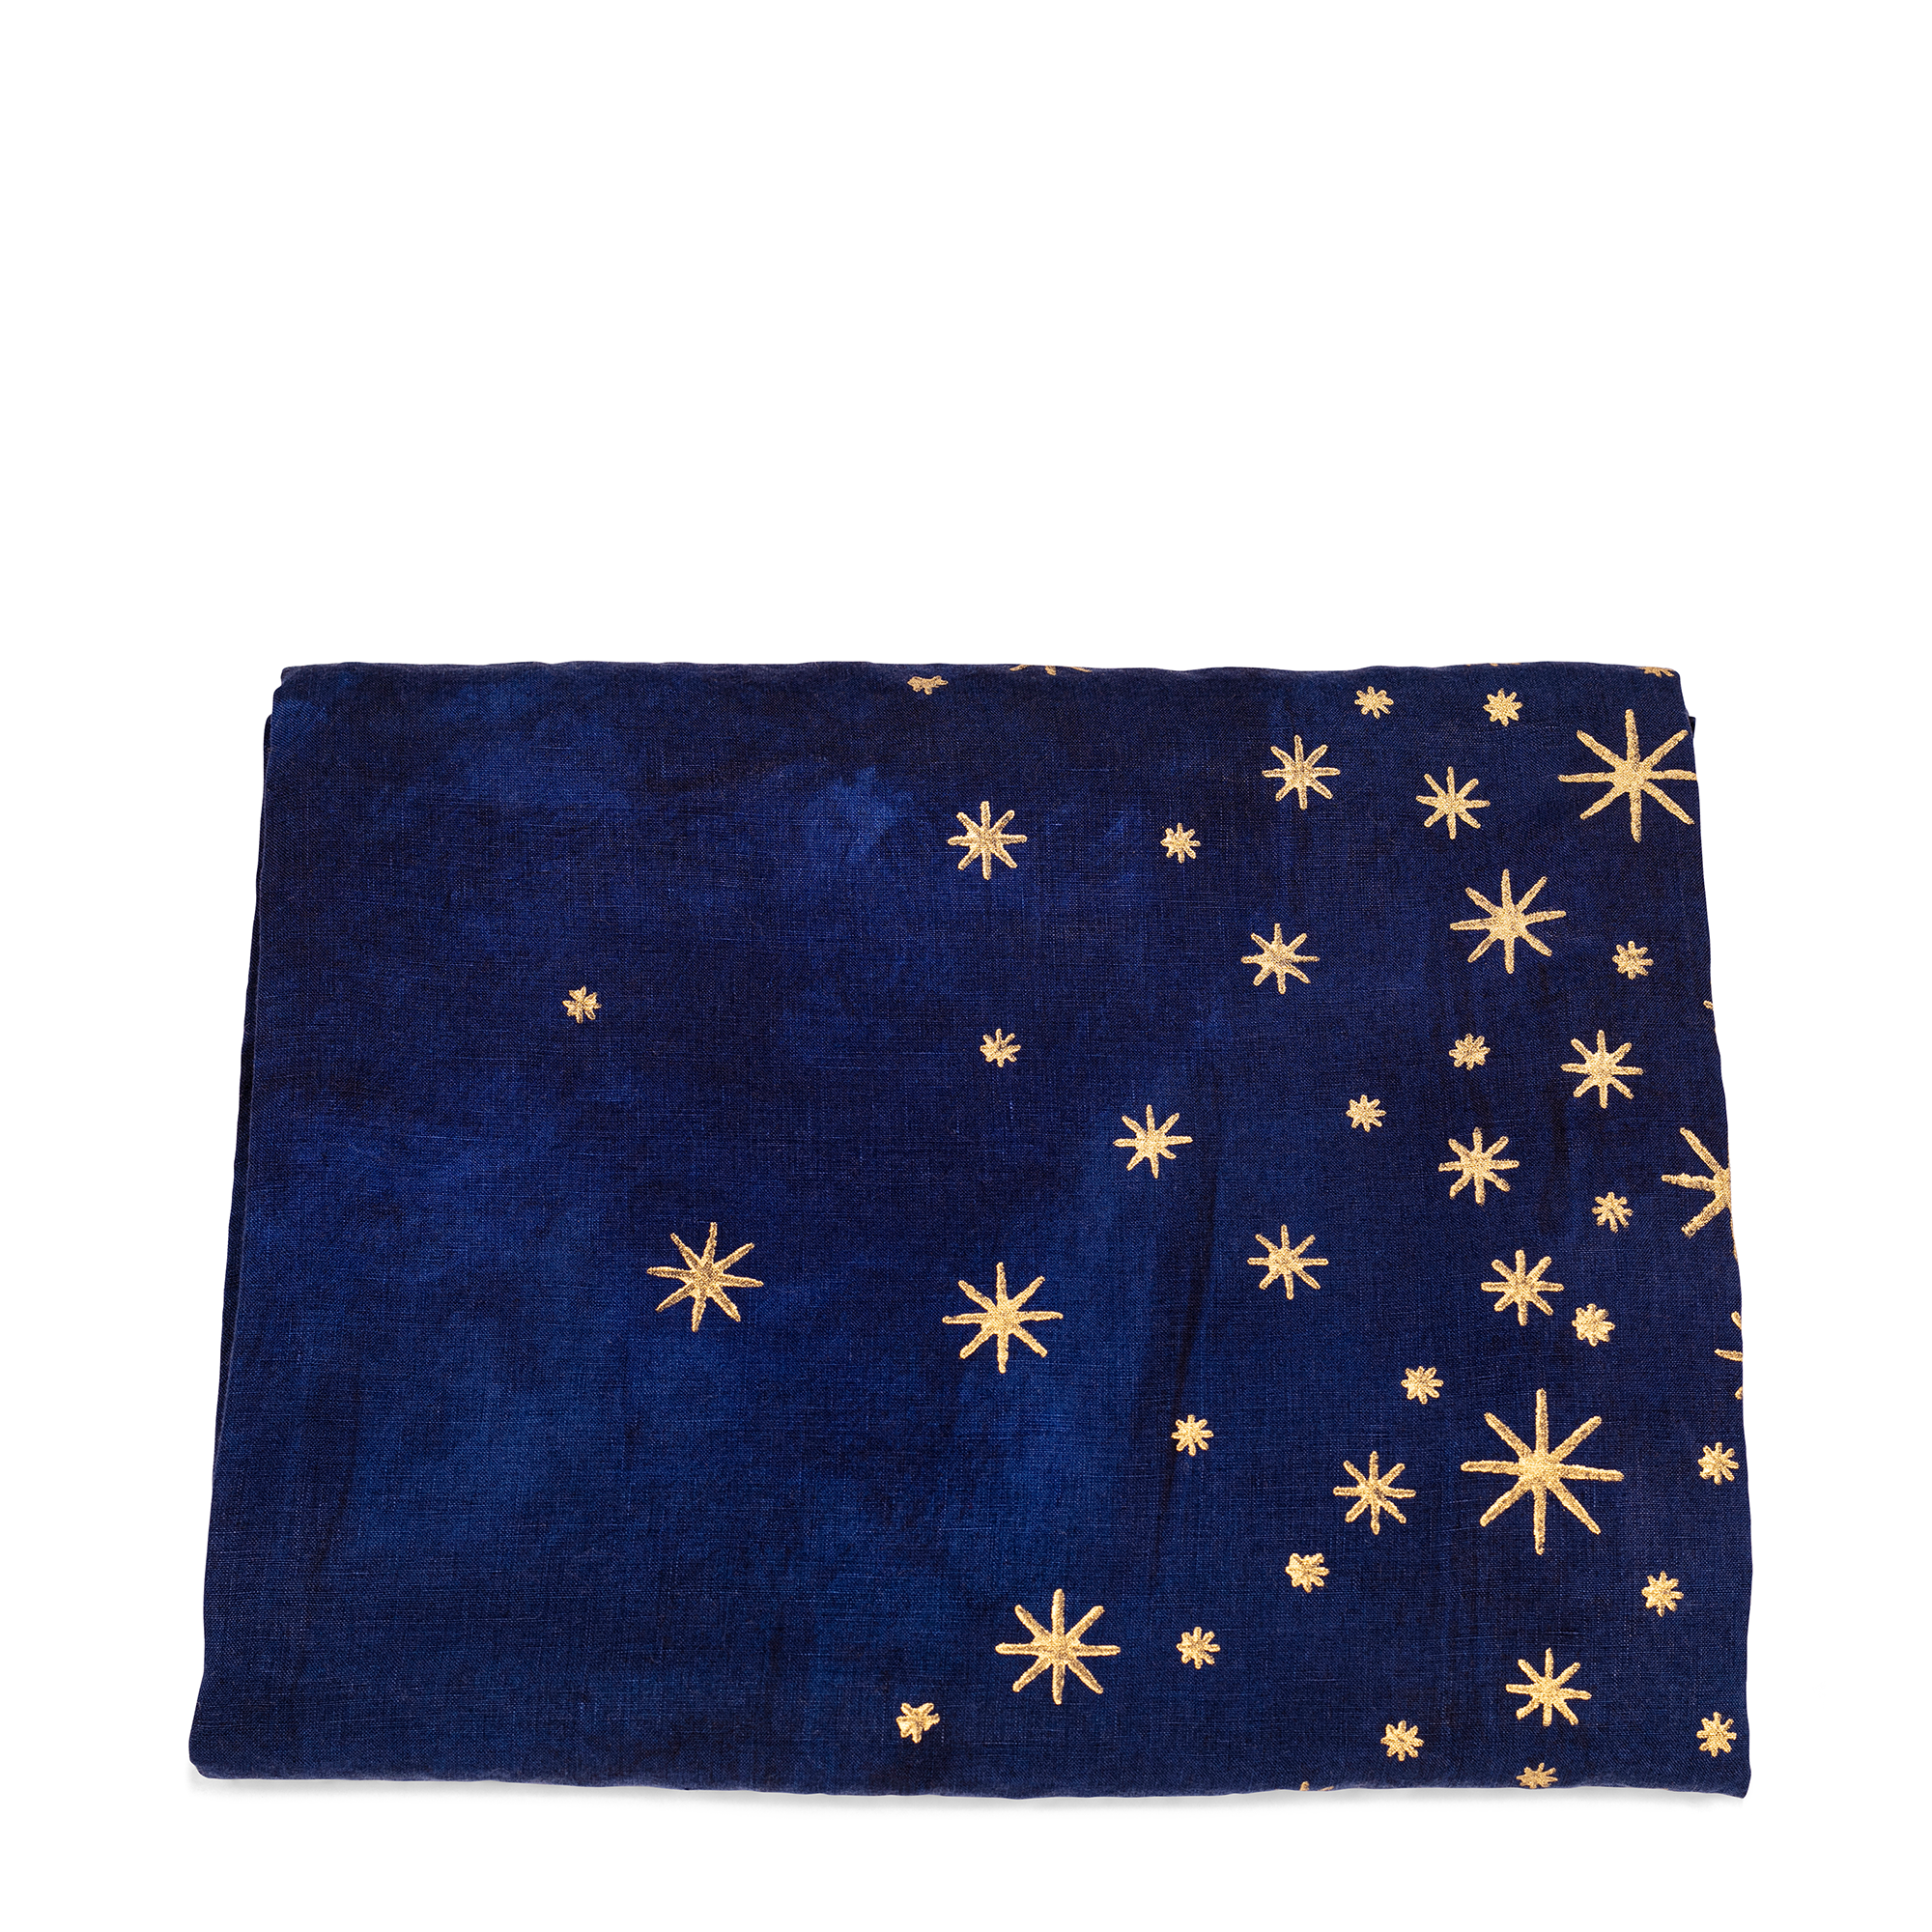 A luxurious indigo linen tablecloth with golden stars, perfect for adding a touch of elegance to your table and kitchen.